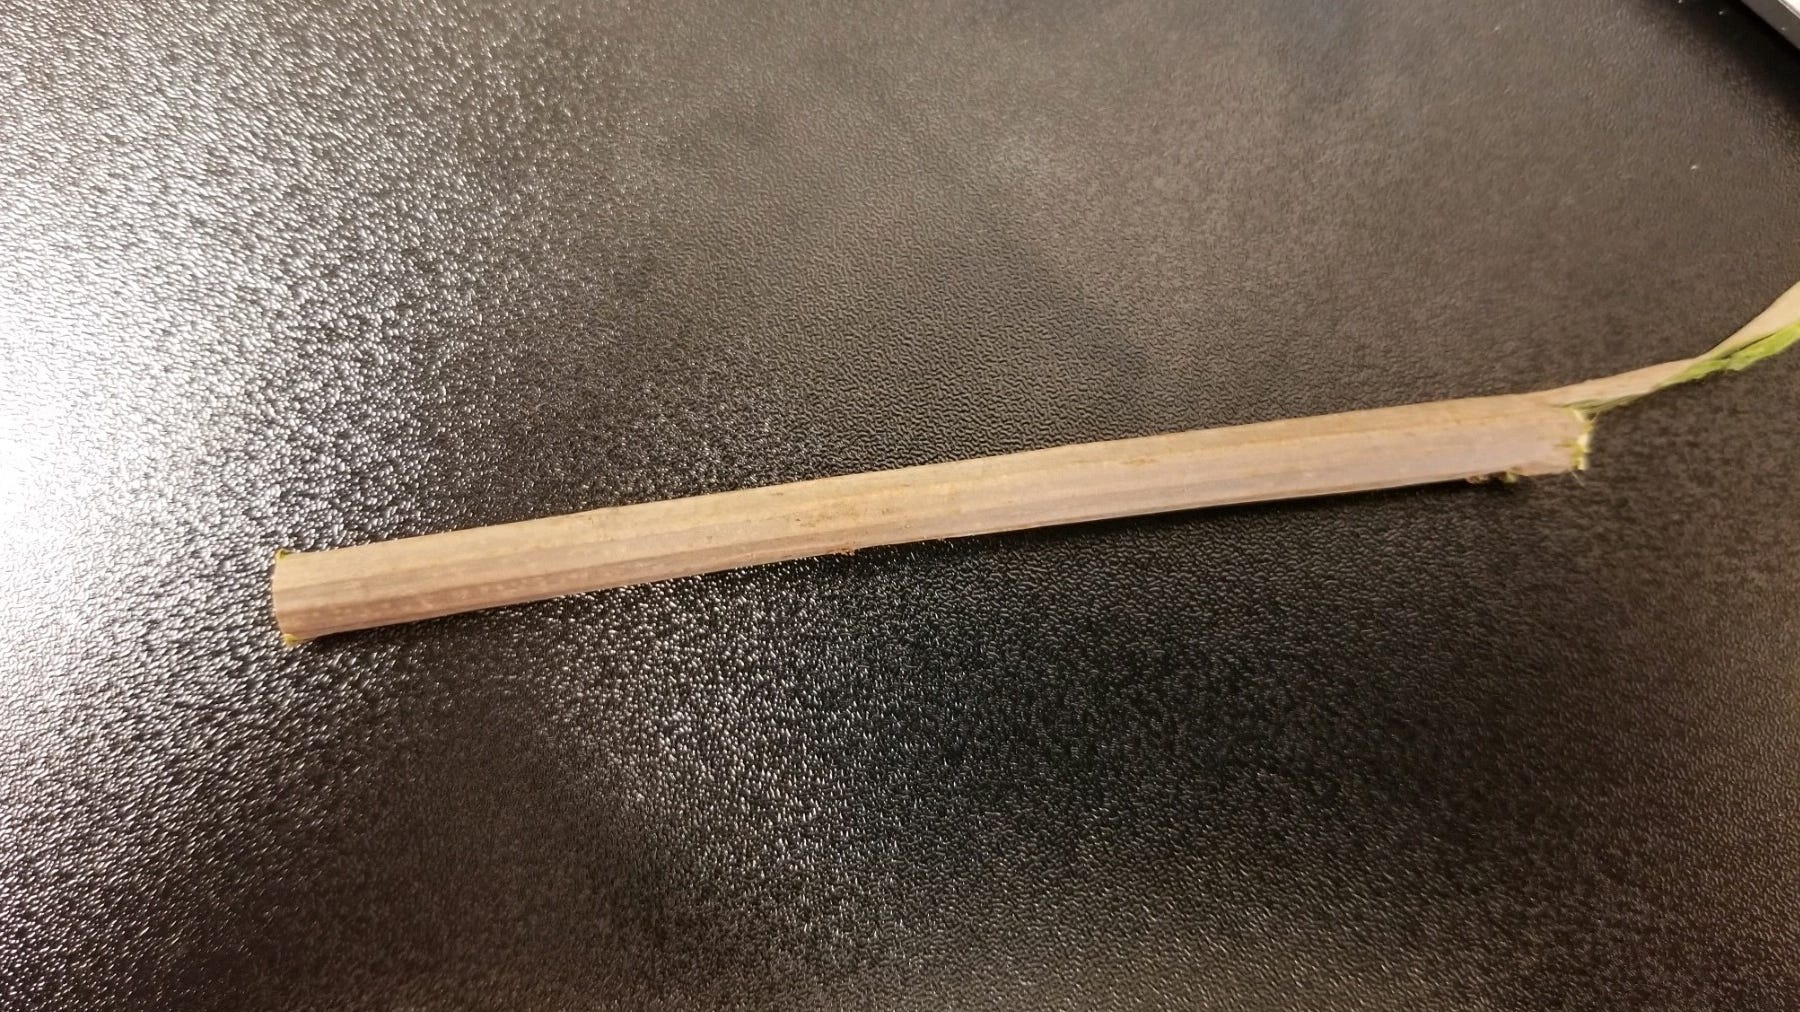 Picture of a stem that couldn't be used for identification